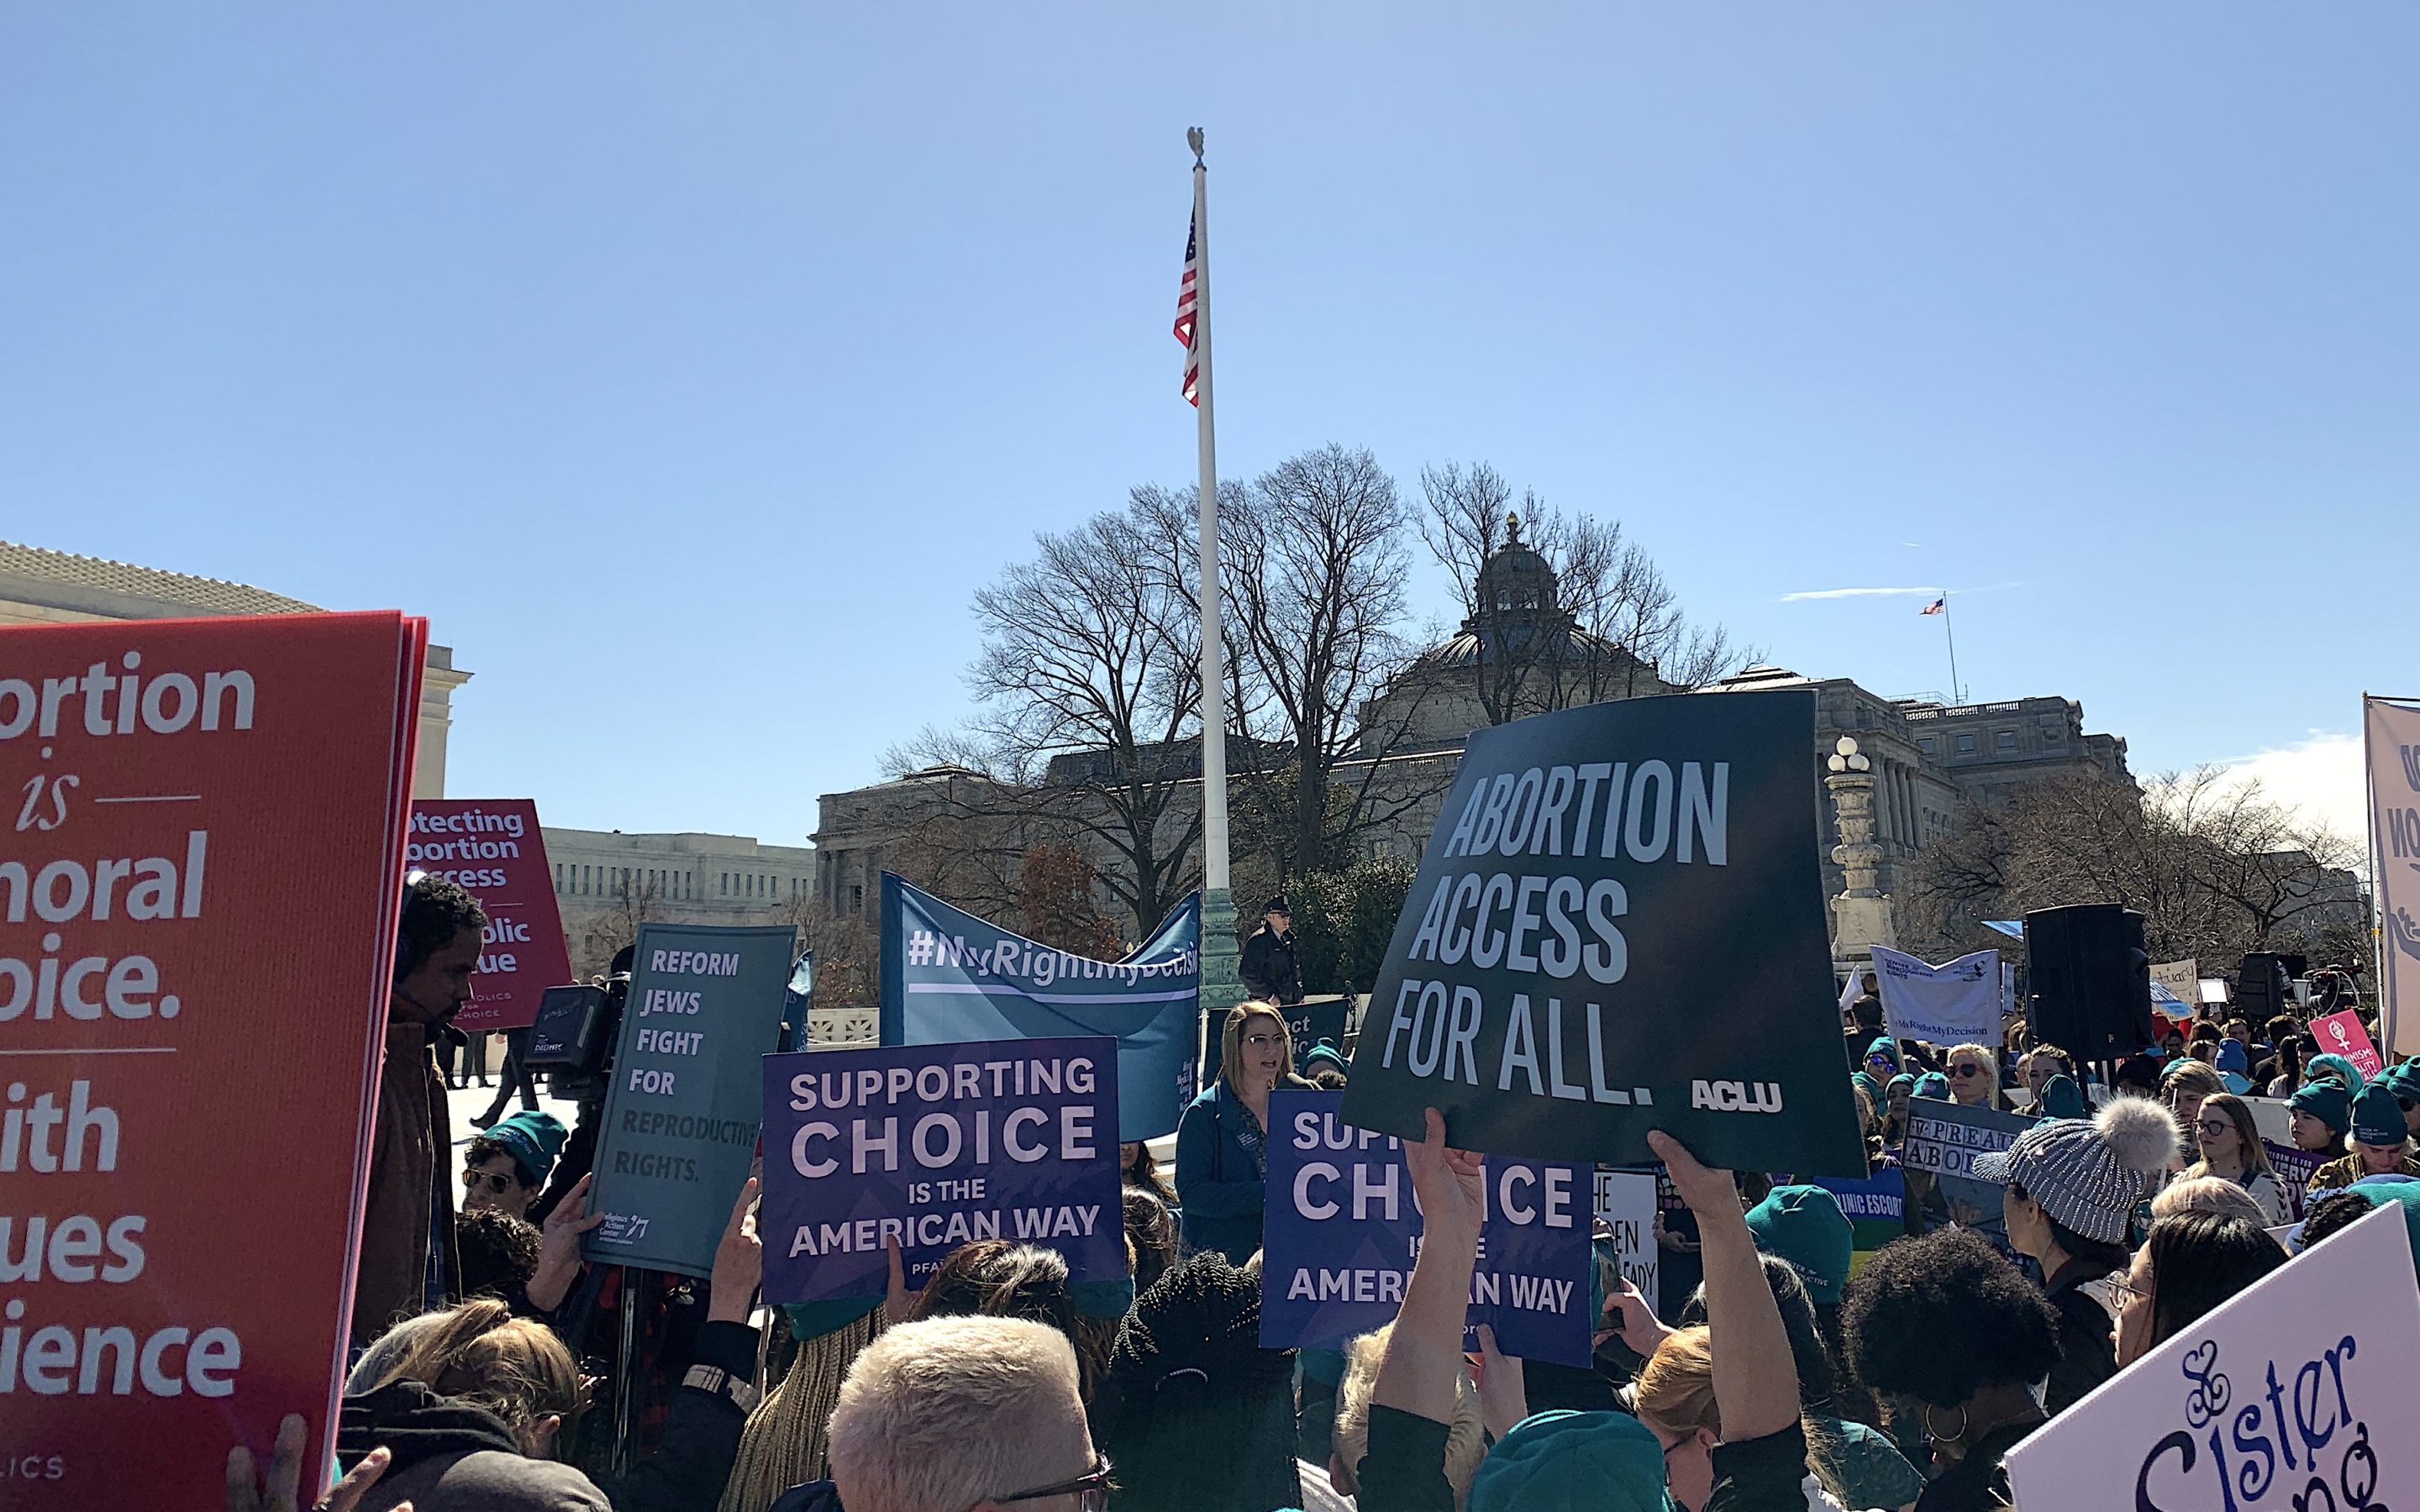 What to expect: Today’s Supreme Court arguments on abortion access